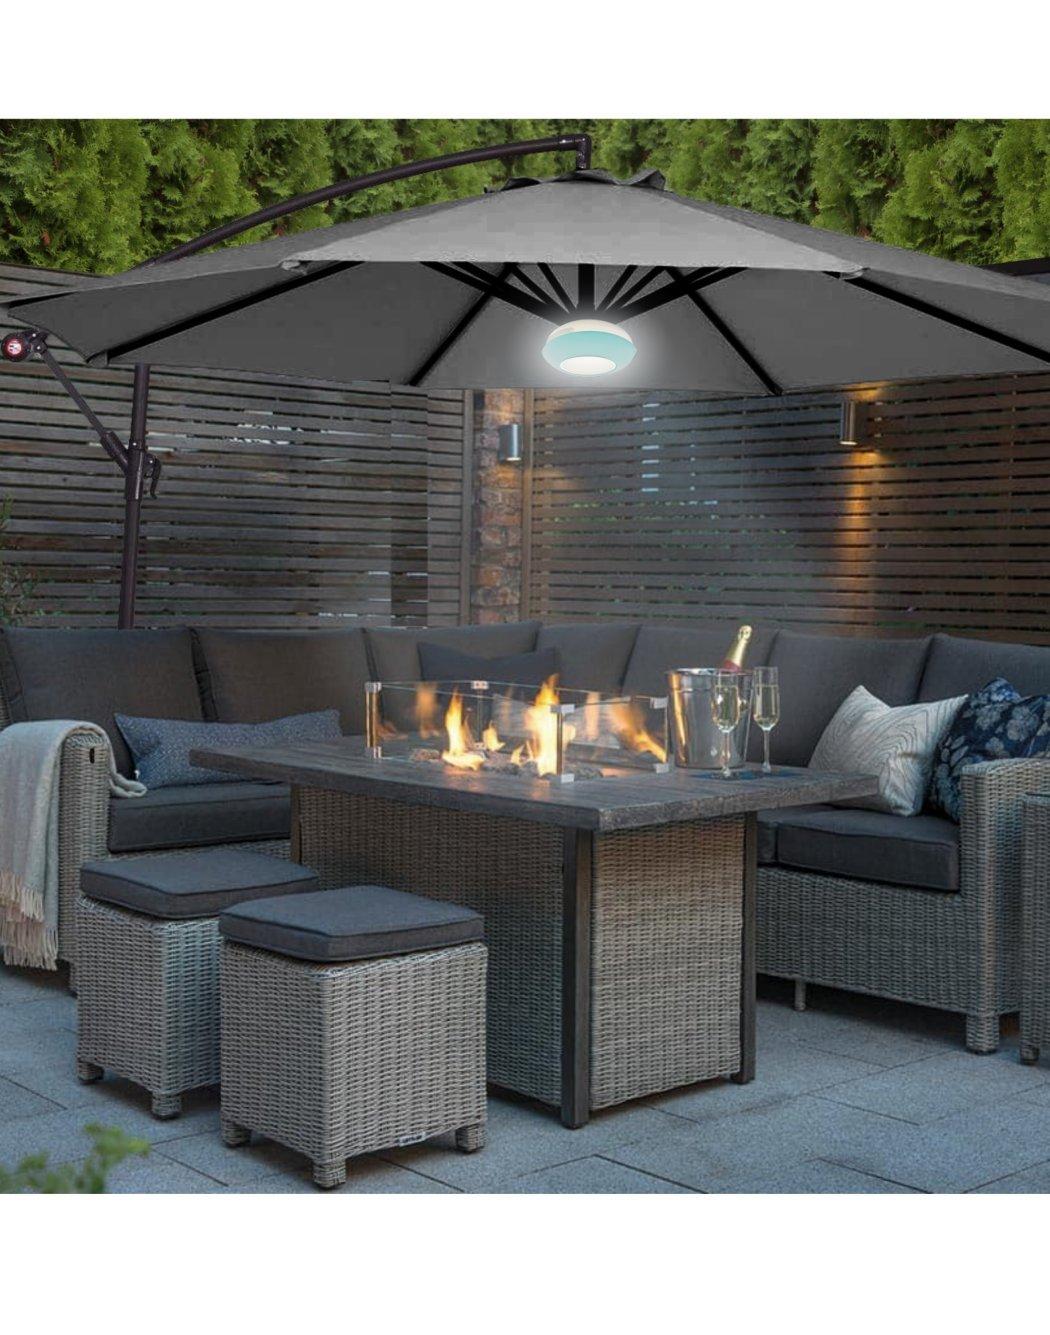 3m Outdoor Cantilever Banana Garden Parasol with Bluetooth Speaker and LED Lights